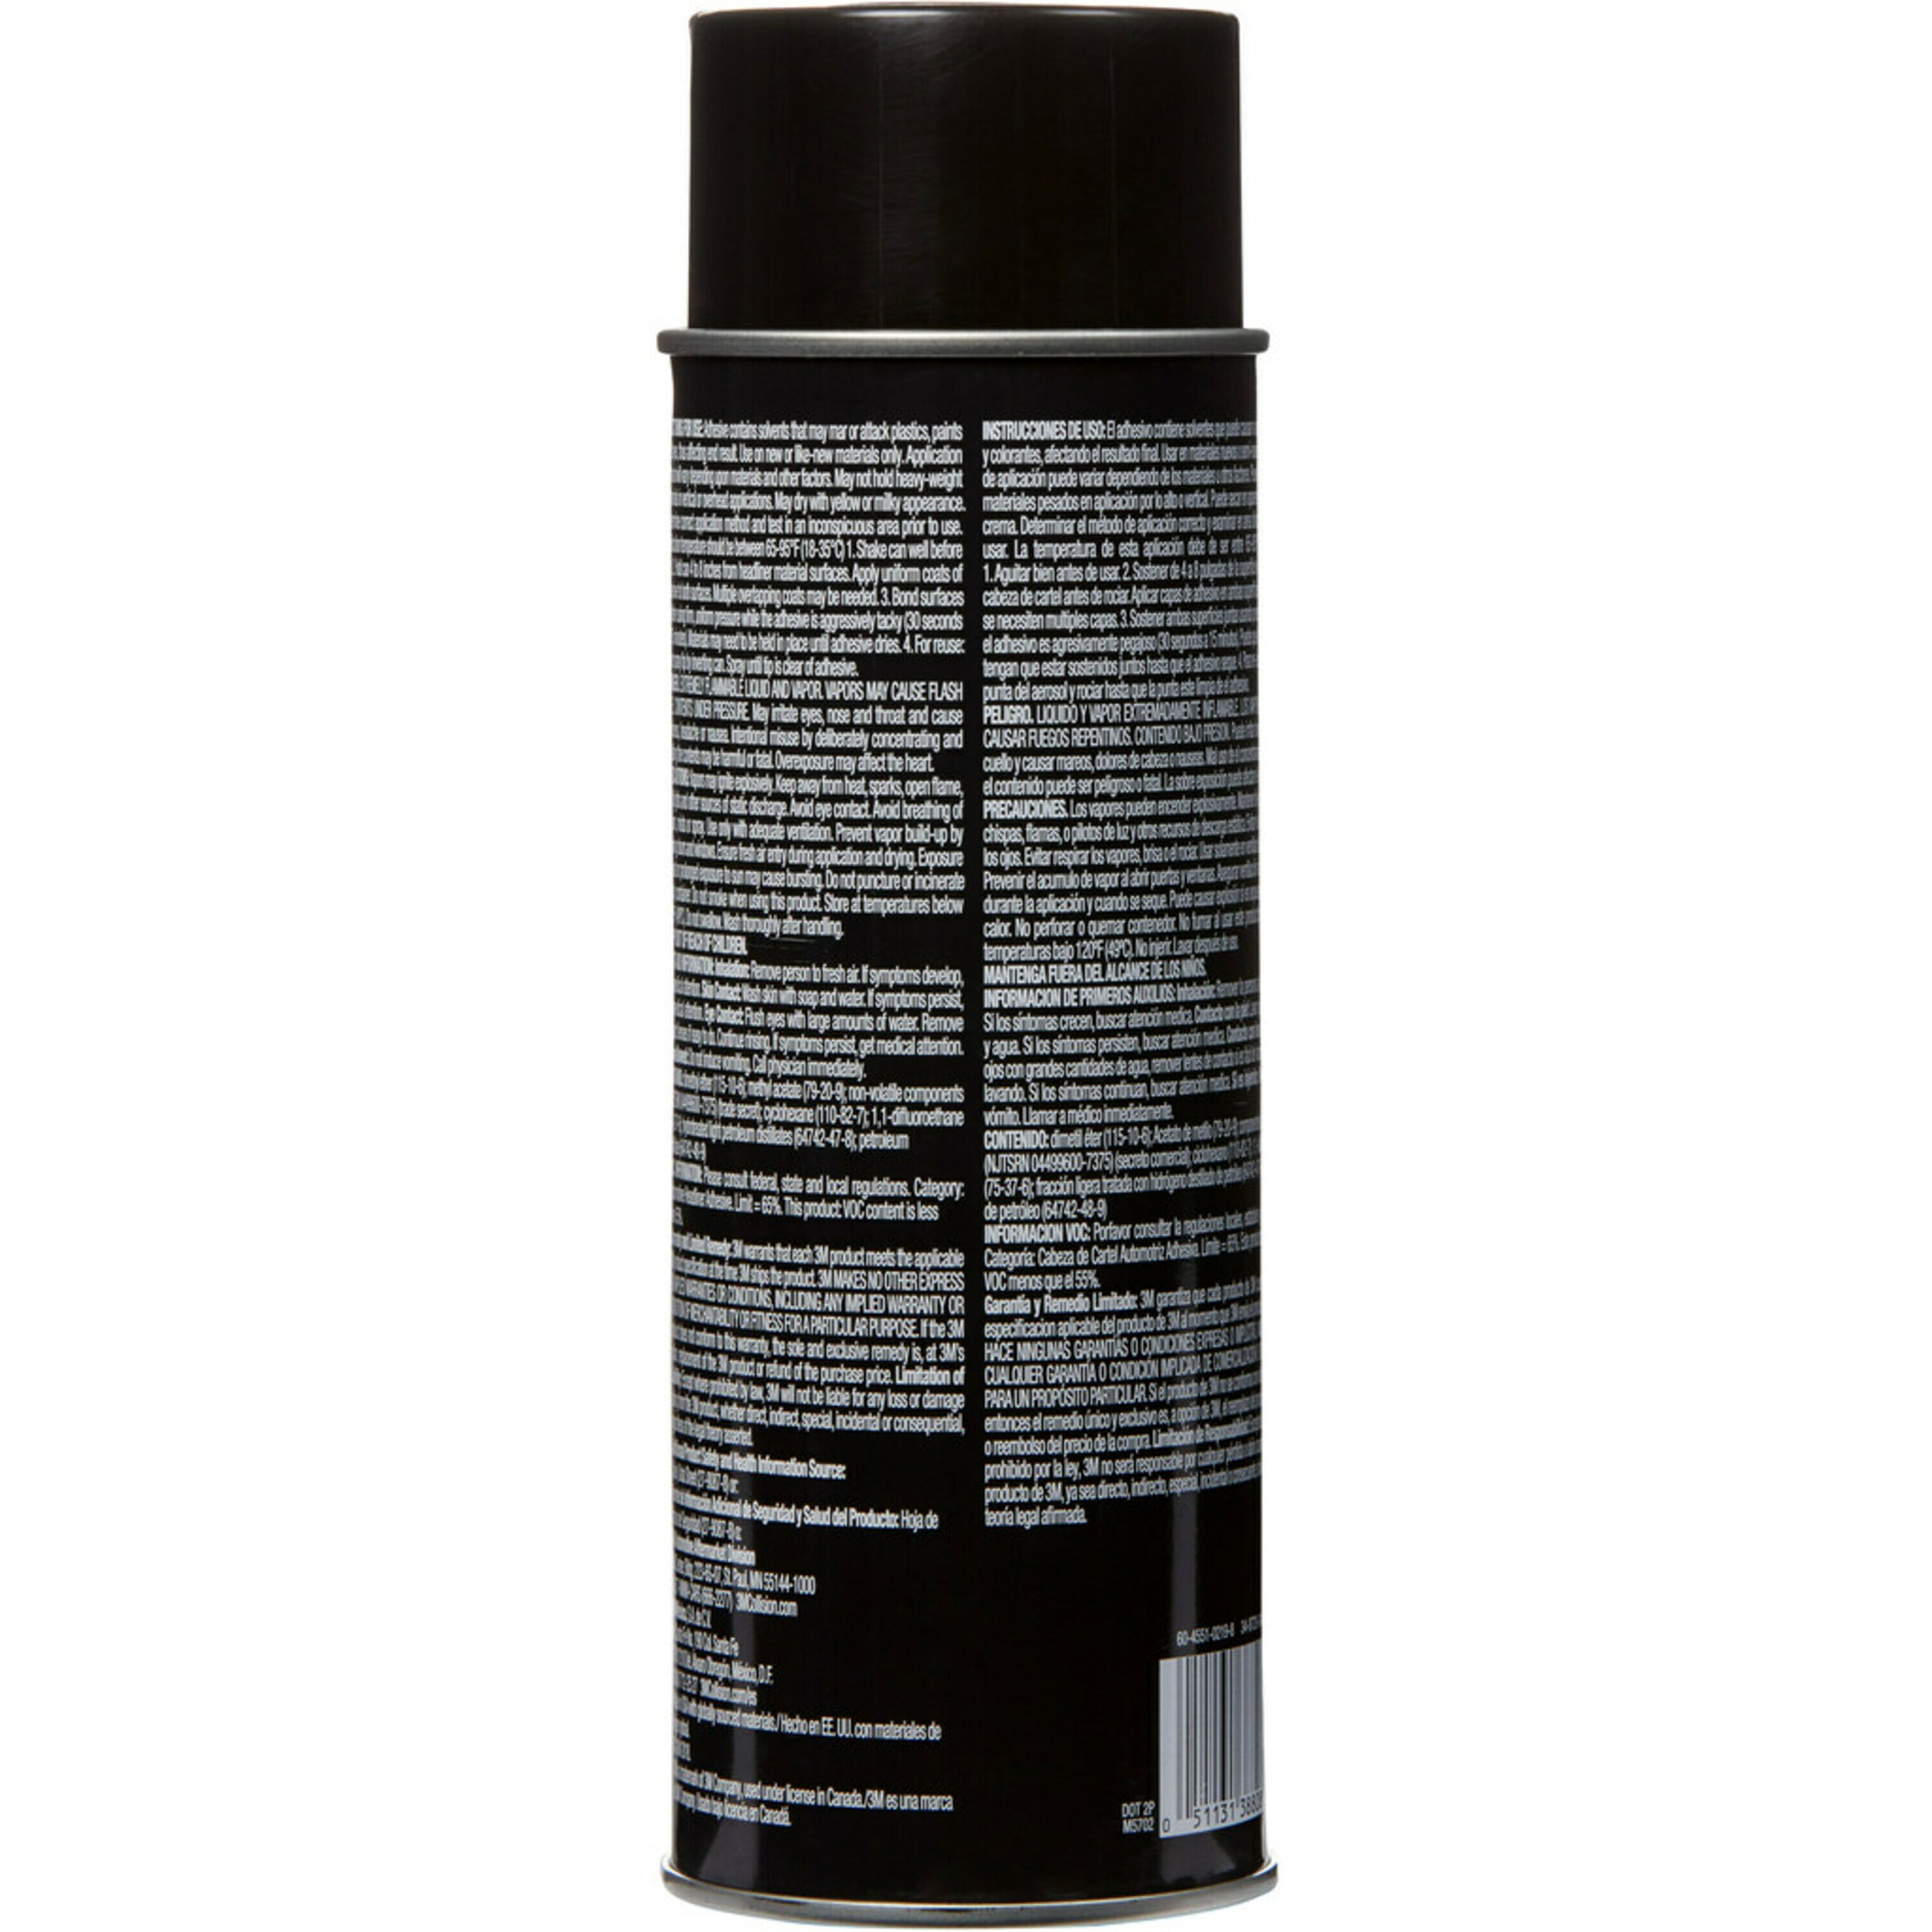  3M 38808 Headliner and Fabric Adhesive - 18.1 oz. - Case of 4 :  Automotive